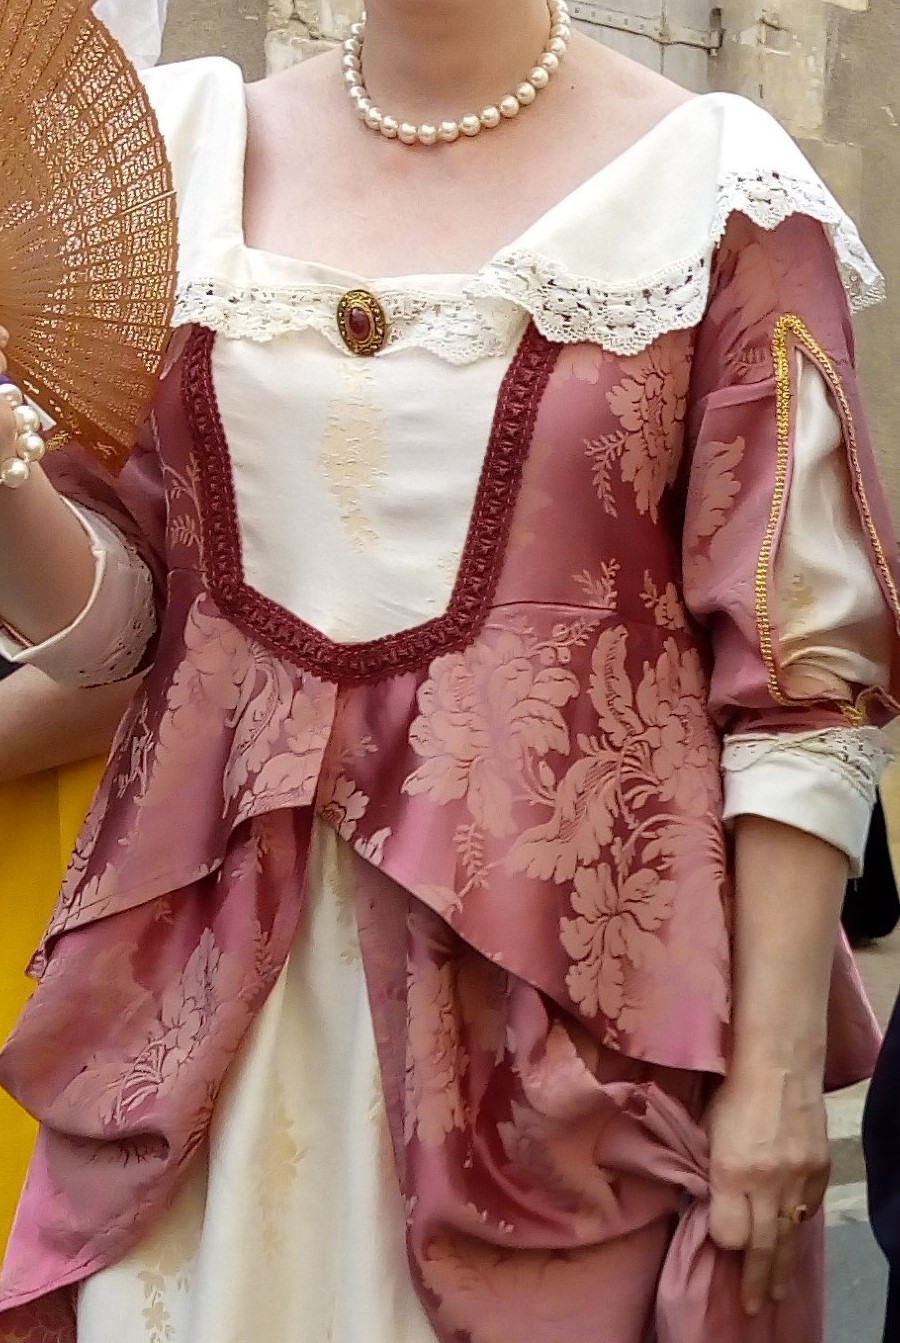 Detail of the Louise Marguerite of Lorraine’s costume